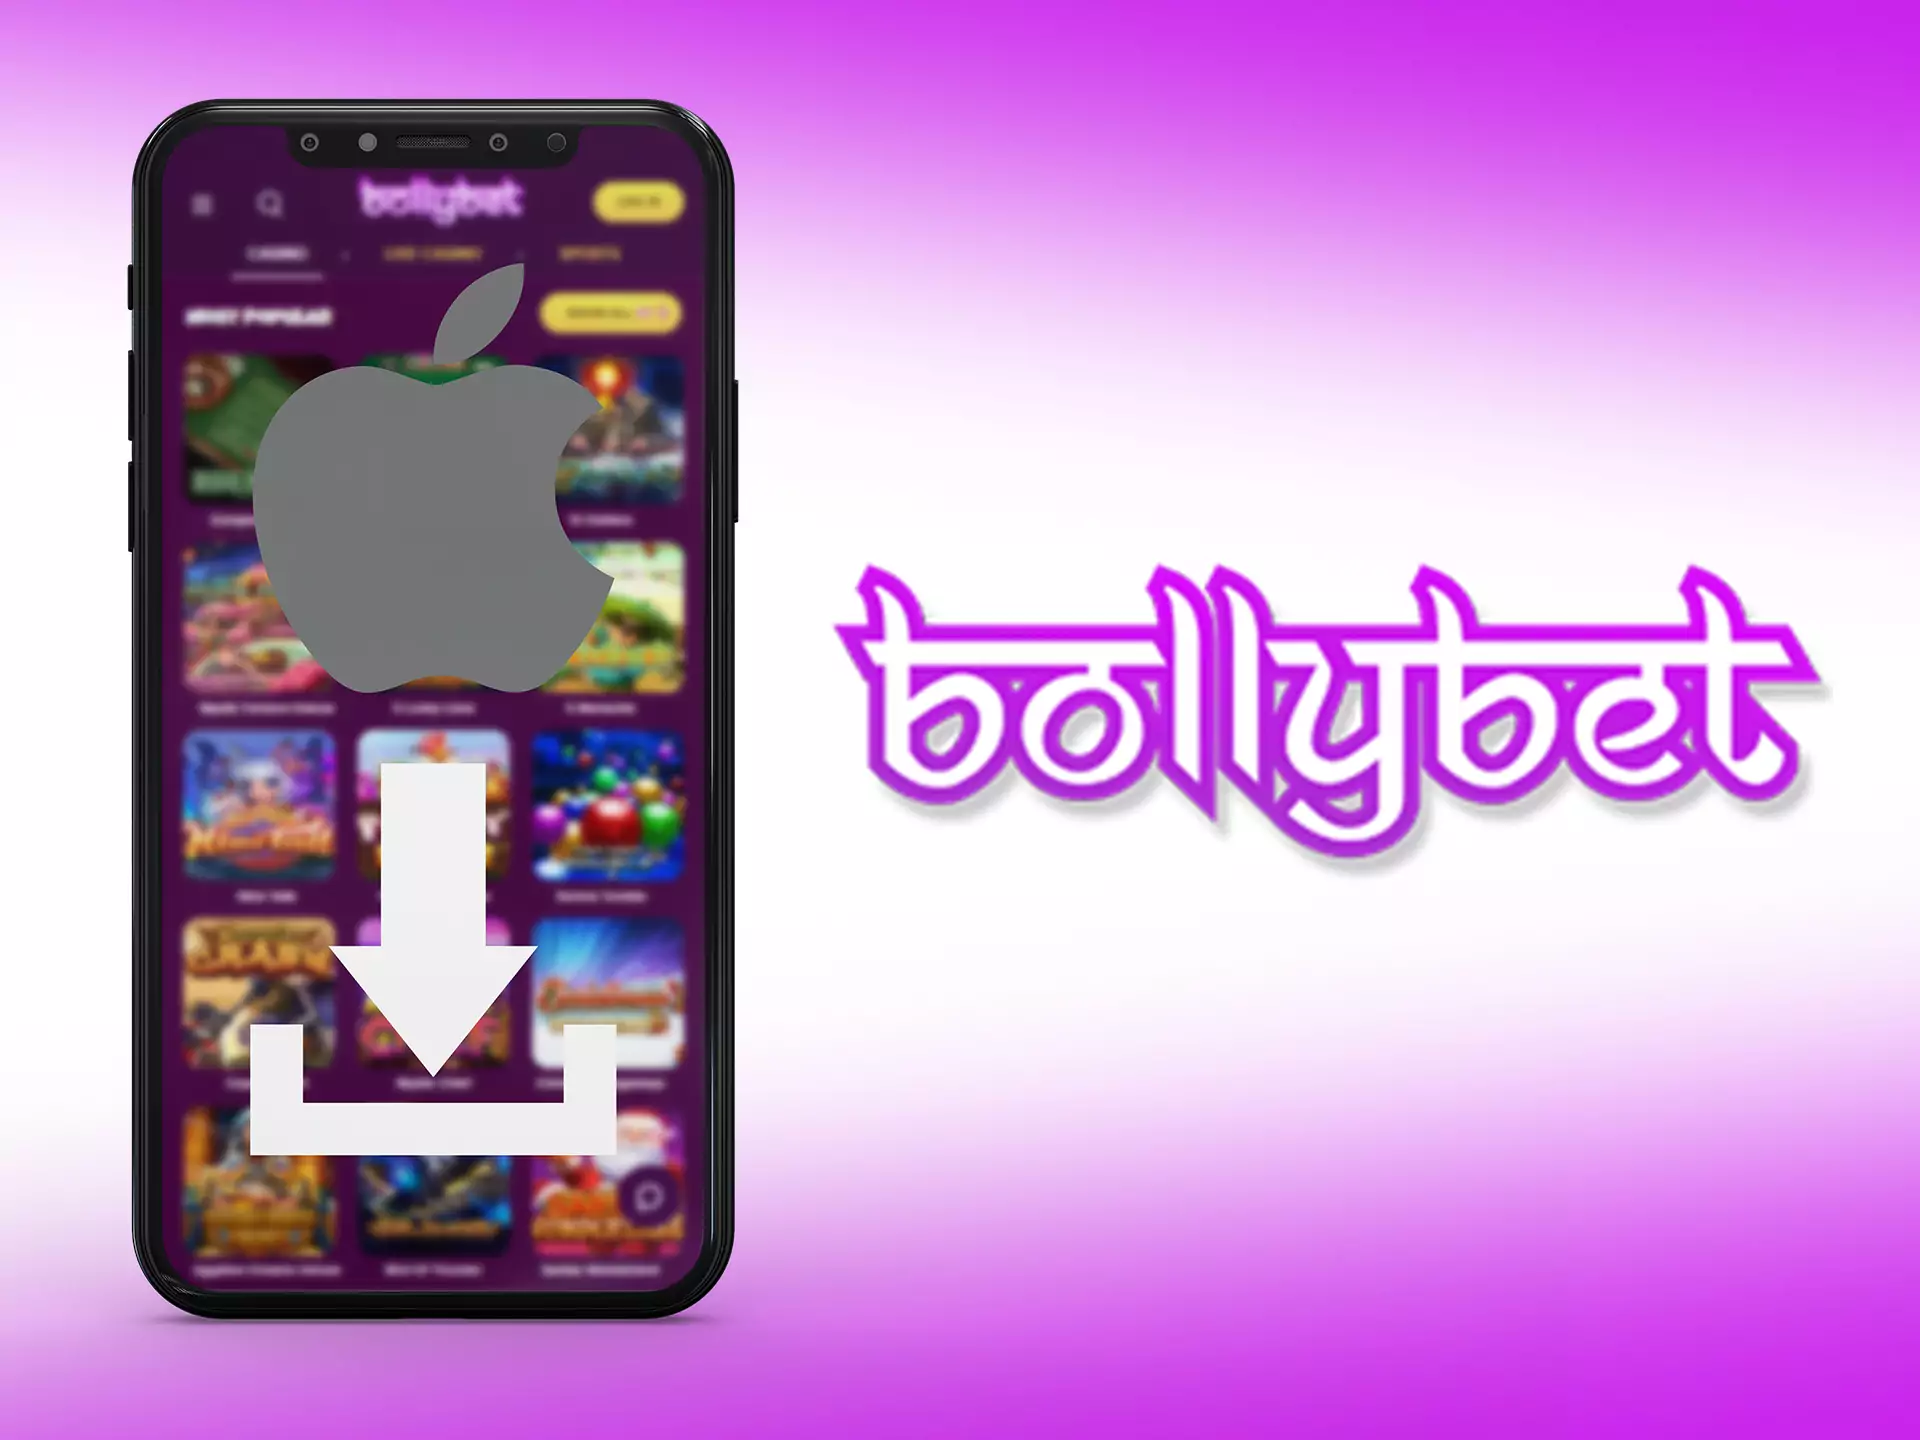 Bollybet app for iOS will be launched soon.